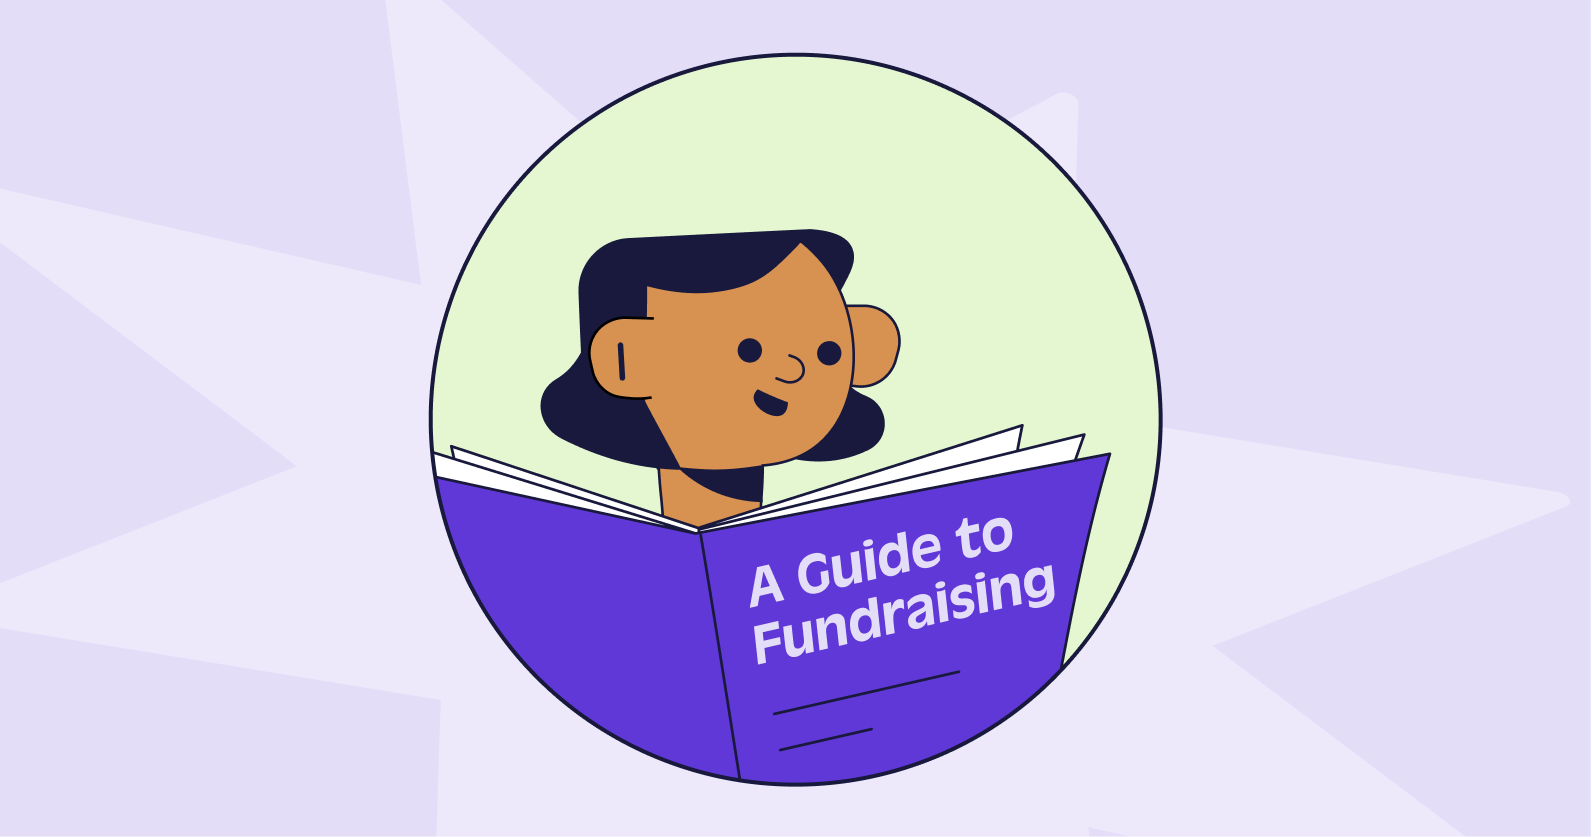 Illustration of a person reading a book titled "A Guide to Fundraising".